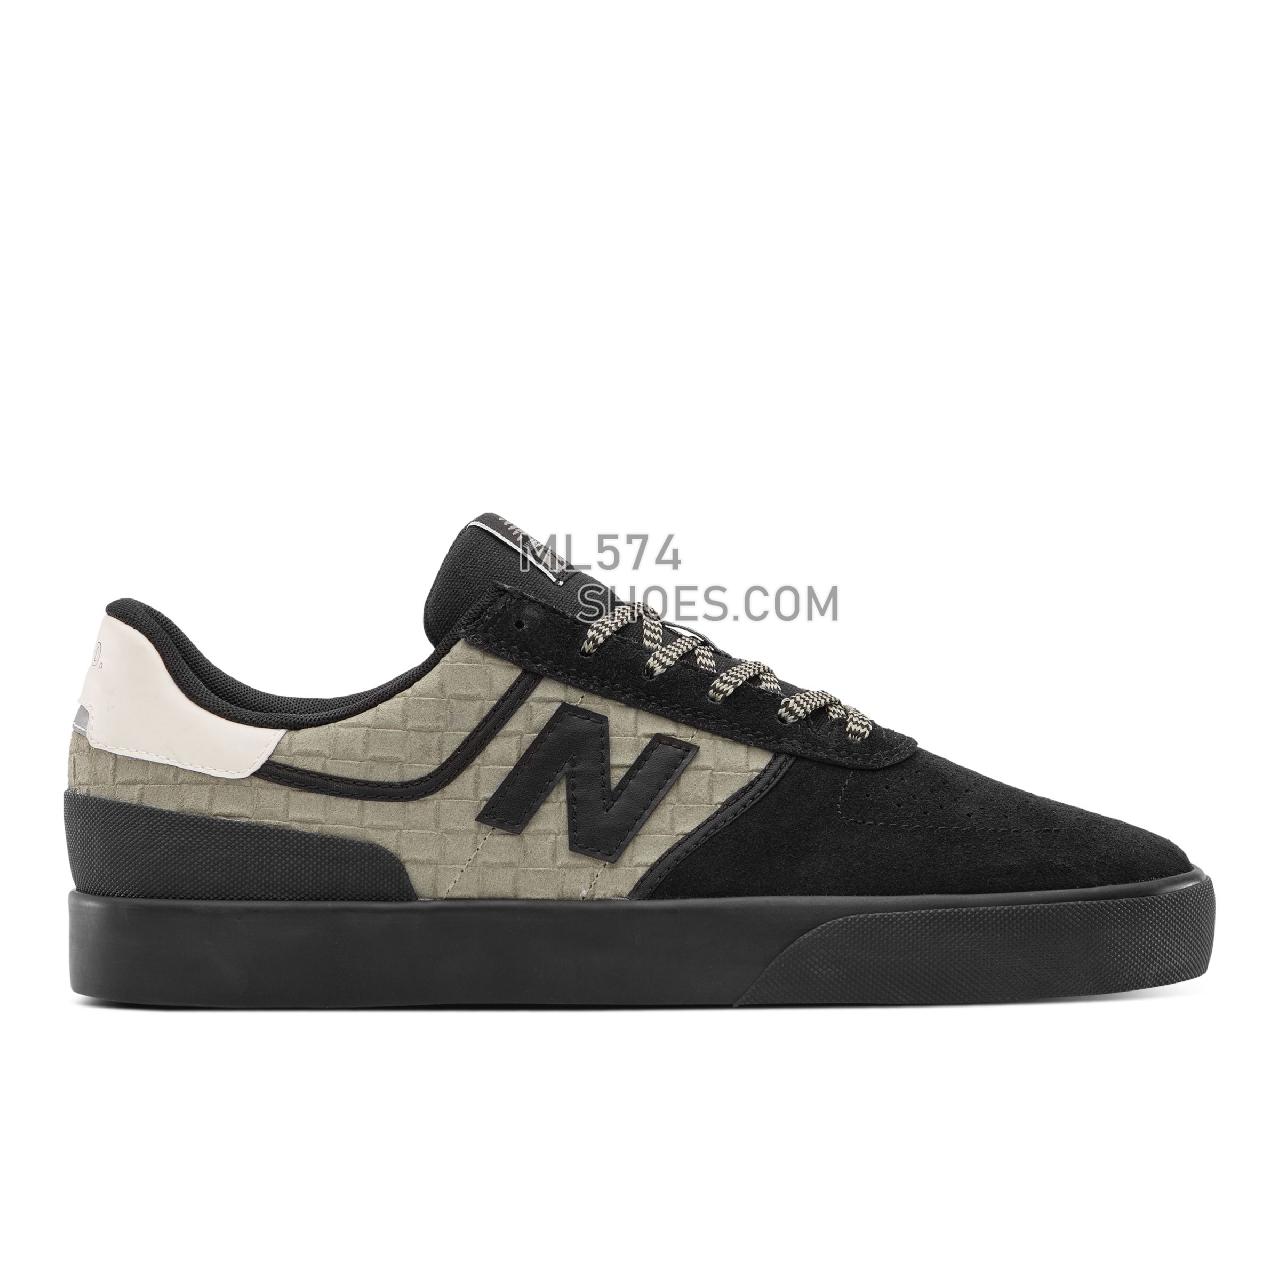 New Balance NB NUMERIC MARGIELYN DIDAL 272 - Men's NB Numeric Skate - Green with Black - NM272MLD